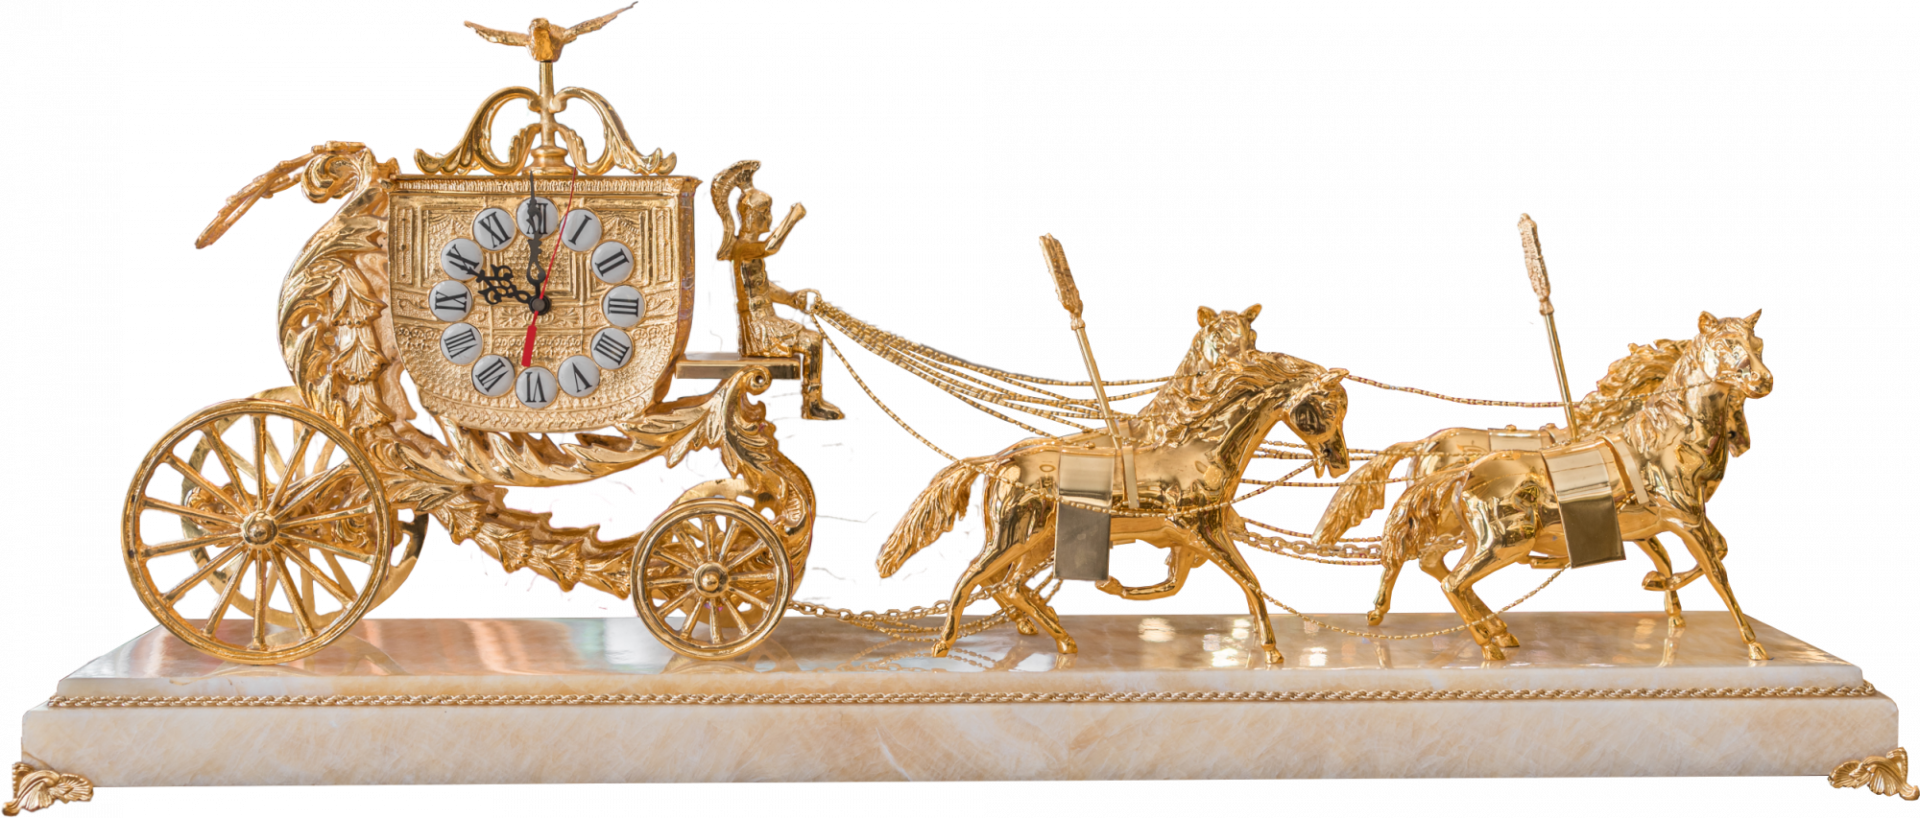 Luxury Four Horse-drawn Carriage Table Clock